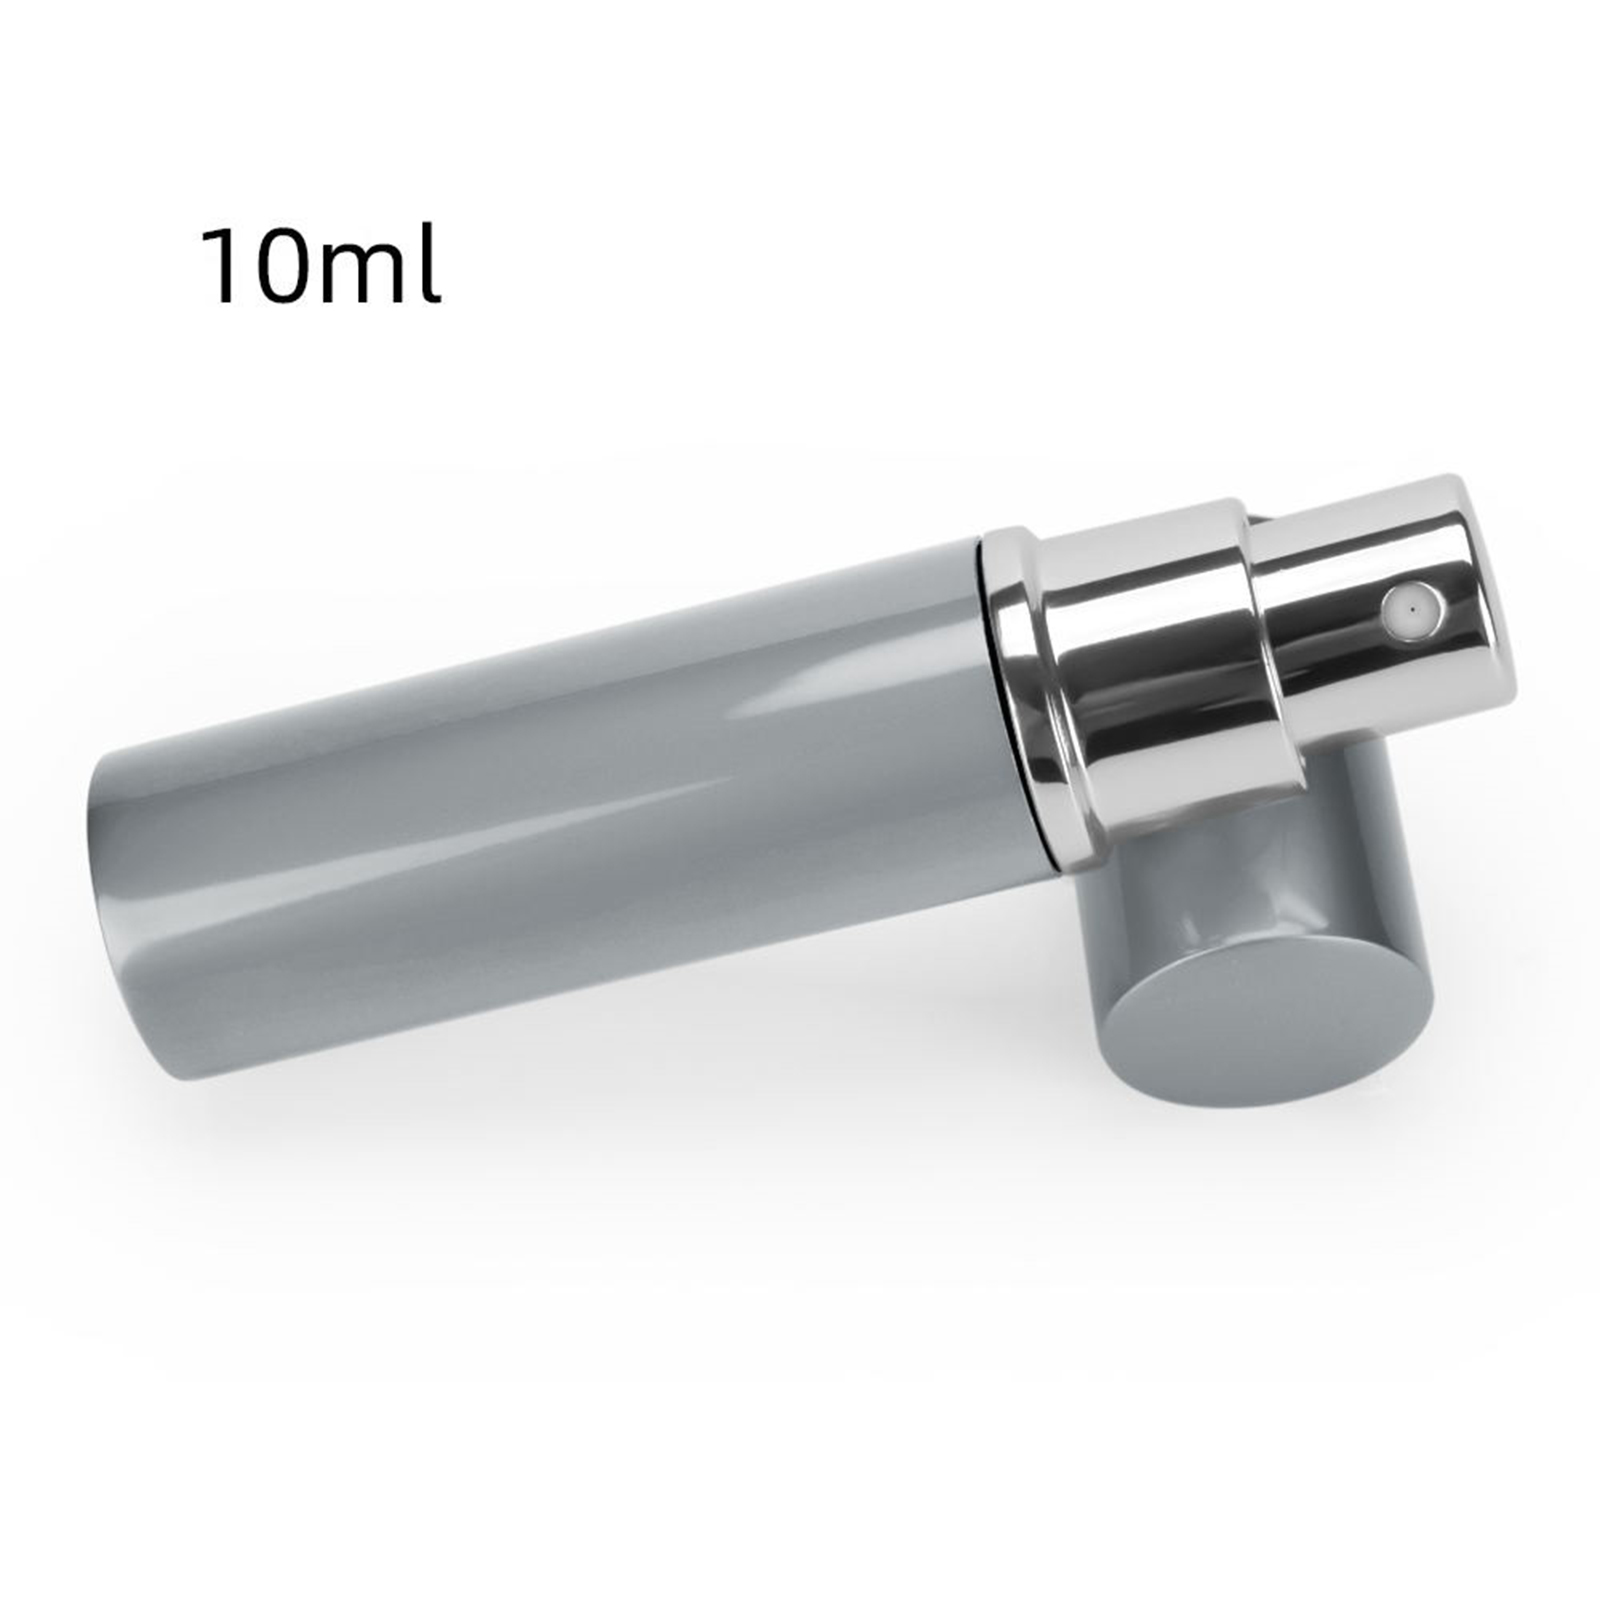 5PCS 10ml Refillable Mini Perfume Bottle Portable Aluminum Atomizer Perfume Spray Bottle Cosmetic Container for Travel - image 2 of 7